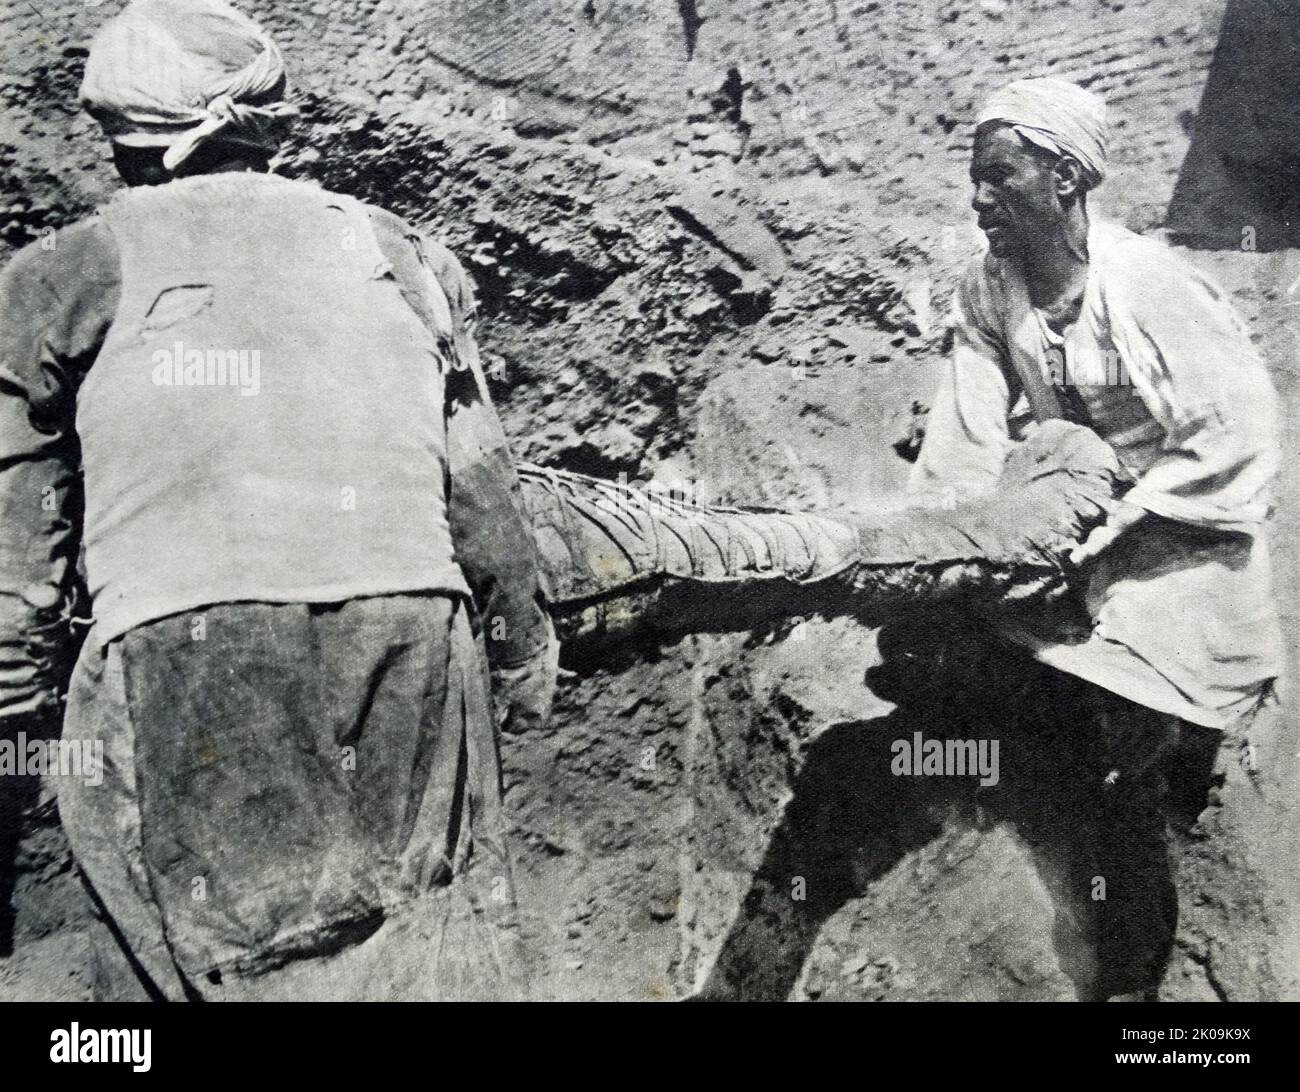 A mummy being removed from a tomb in Egypt. Stock Photo